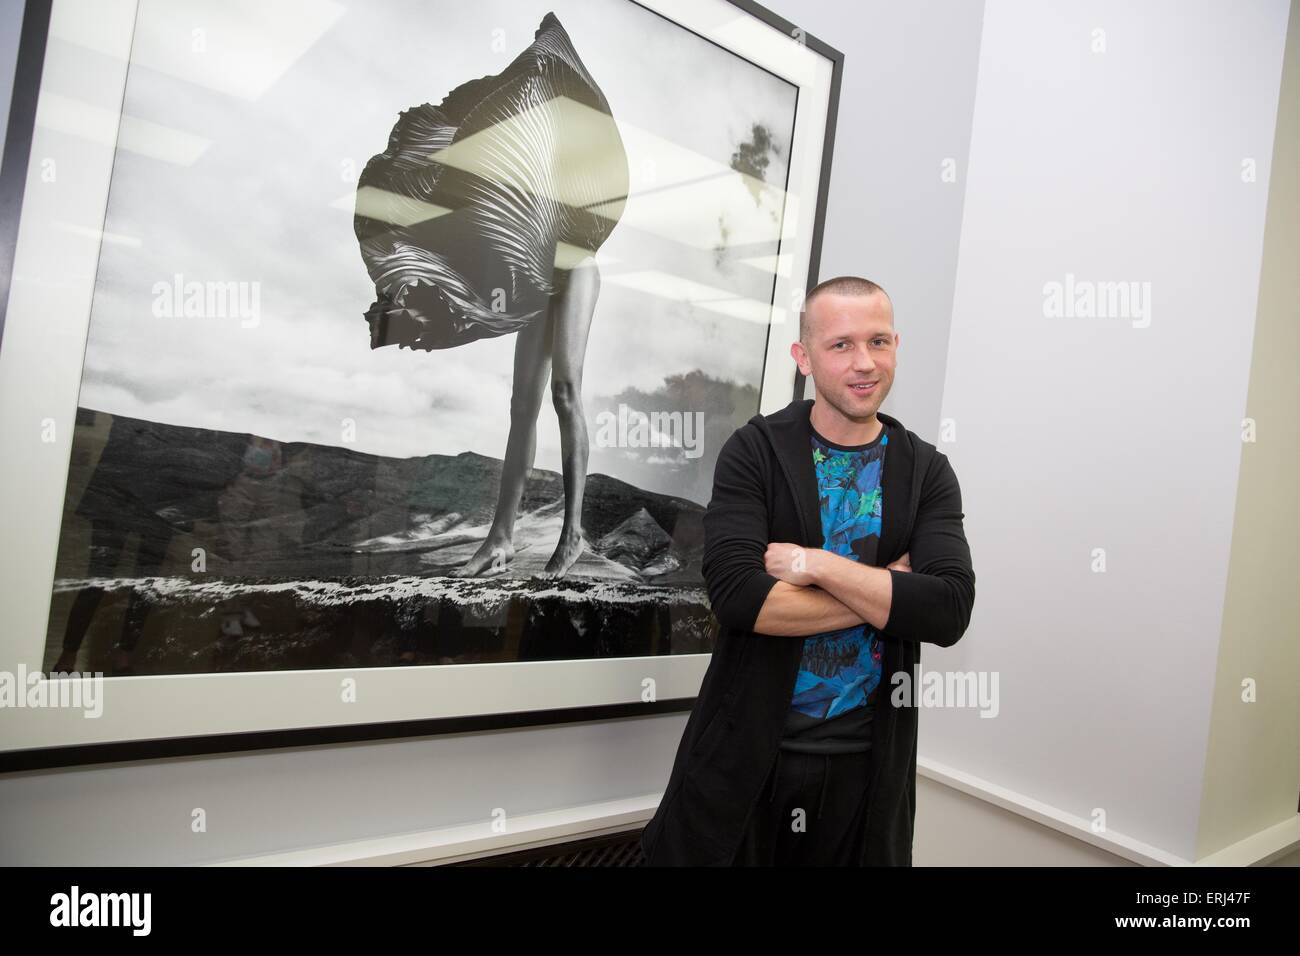 Berlin, Germany. 3rd June, 2015. Photographer Szymon Brodziak stands next to one of his photographic work during a press conference on the photo exhibition 'Newton. Horvat. Brodziak' at the Museum of Photography in Berlin, Germany, 3 June 2015. The exhibition showcases the photographic works of Helmut Newton, Frank Horvat and Szymon Brodziak und runs until 15 November 2015. Photo: JOERG CARSTENSEN/dpa/Alamy Live News Stock Photo